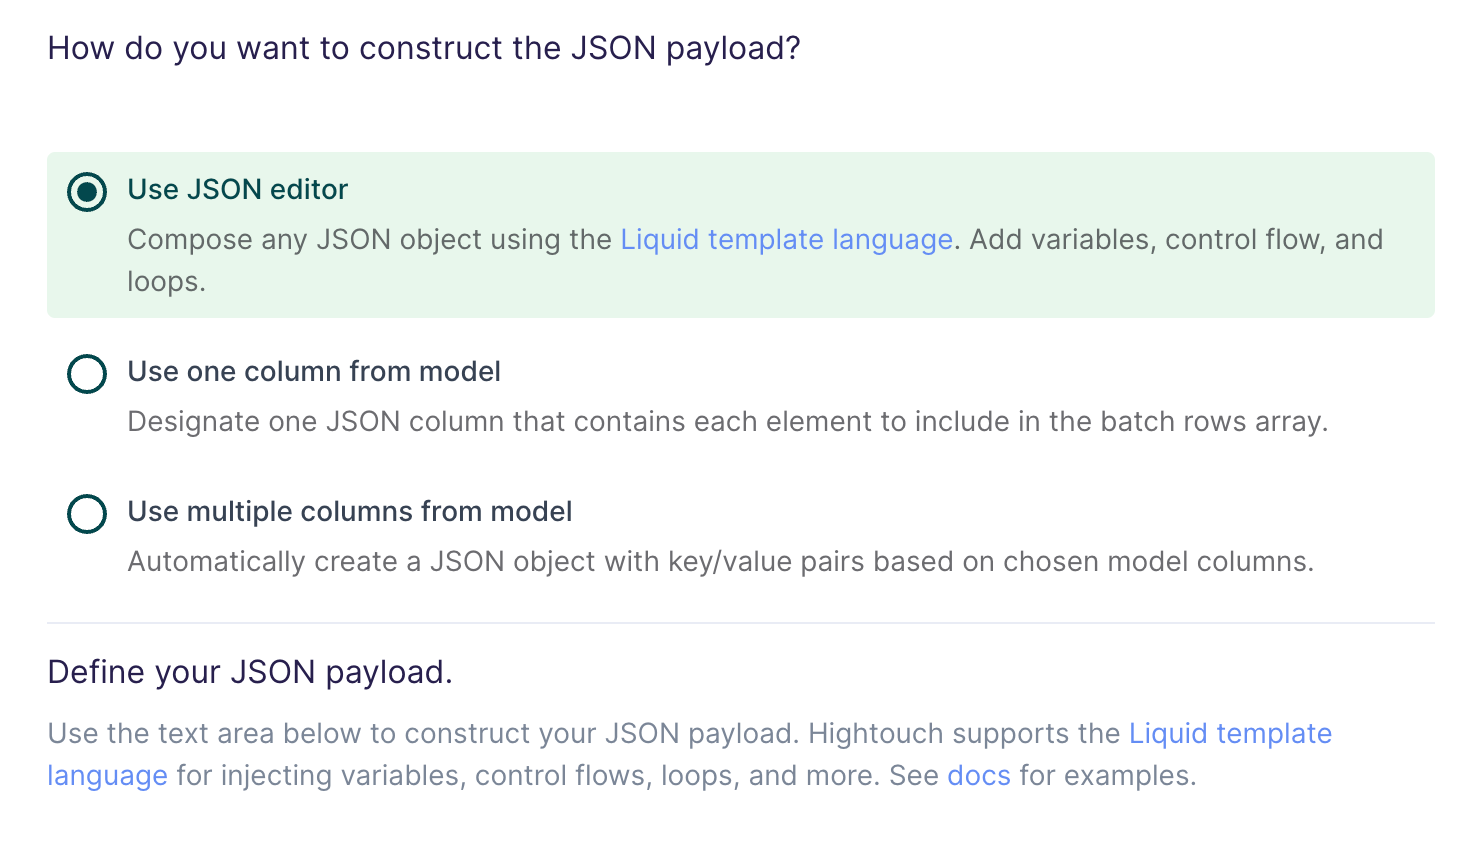 Selecting the JSON editor method in the Hightouch UI